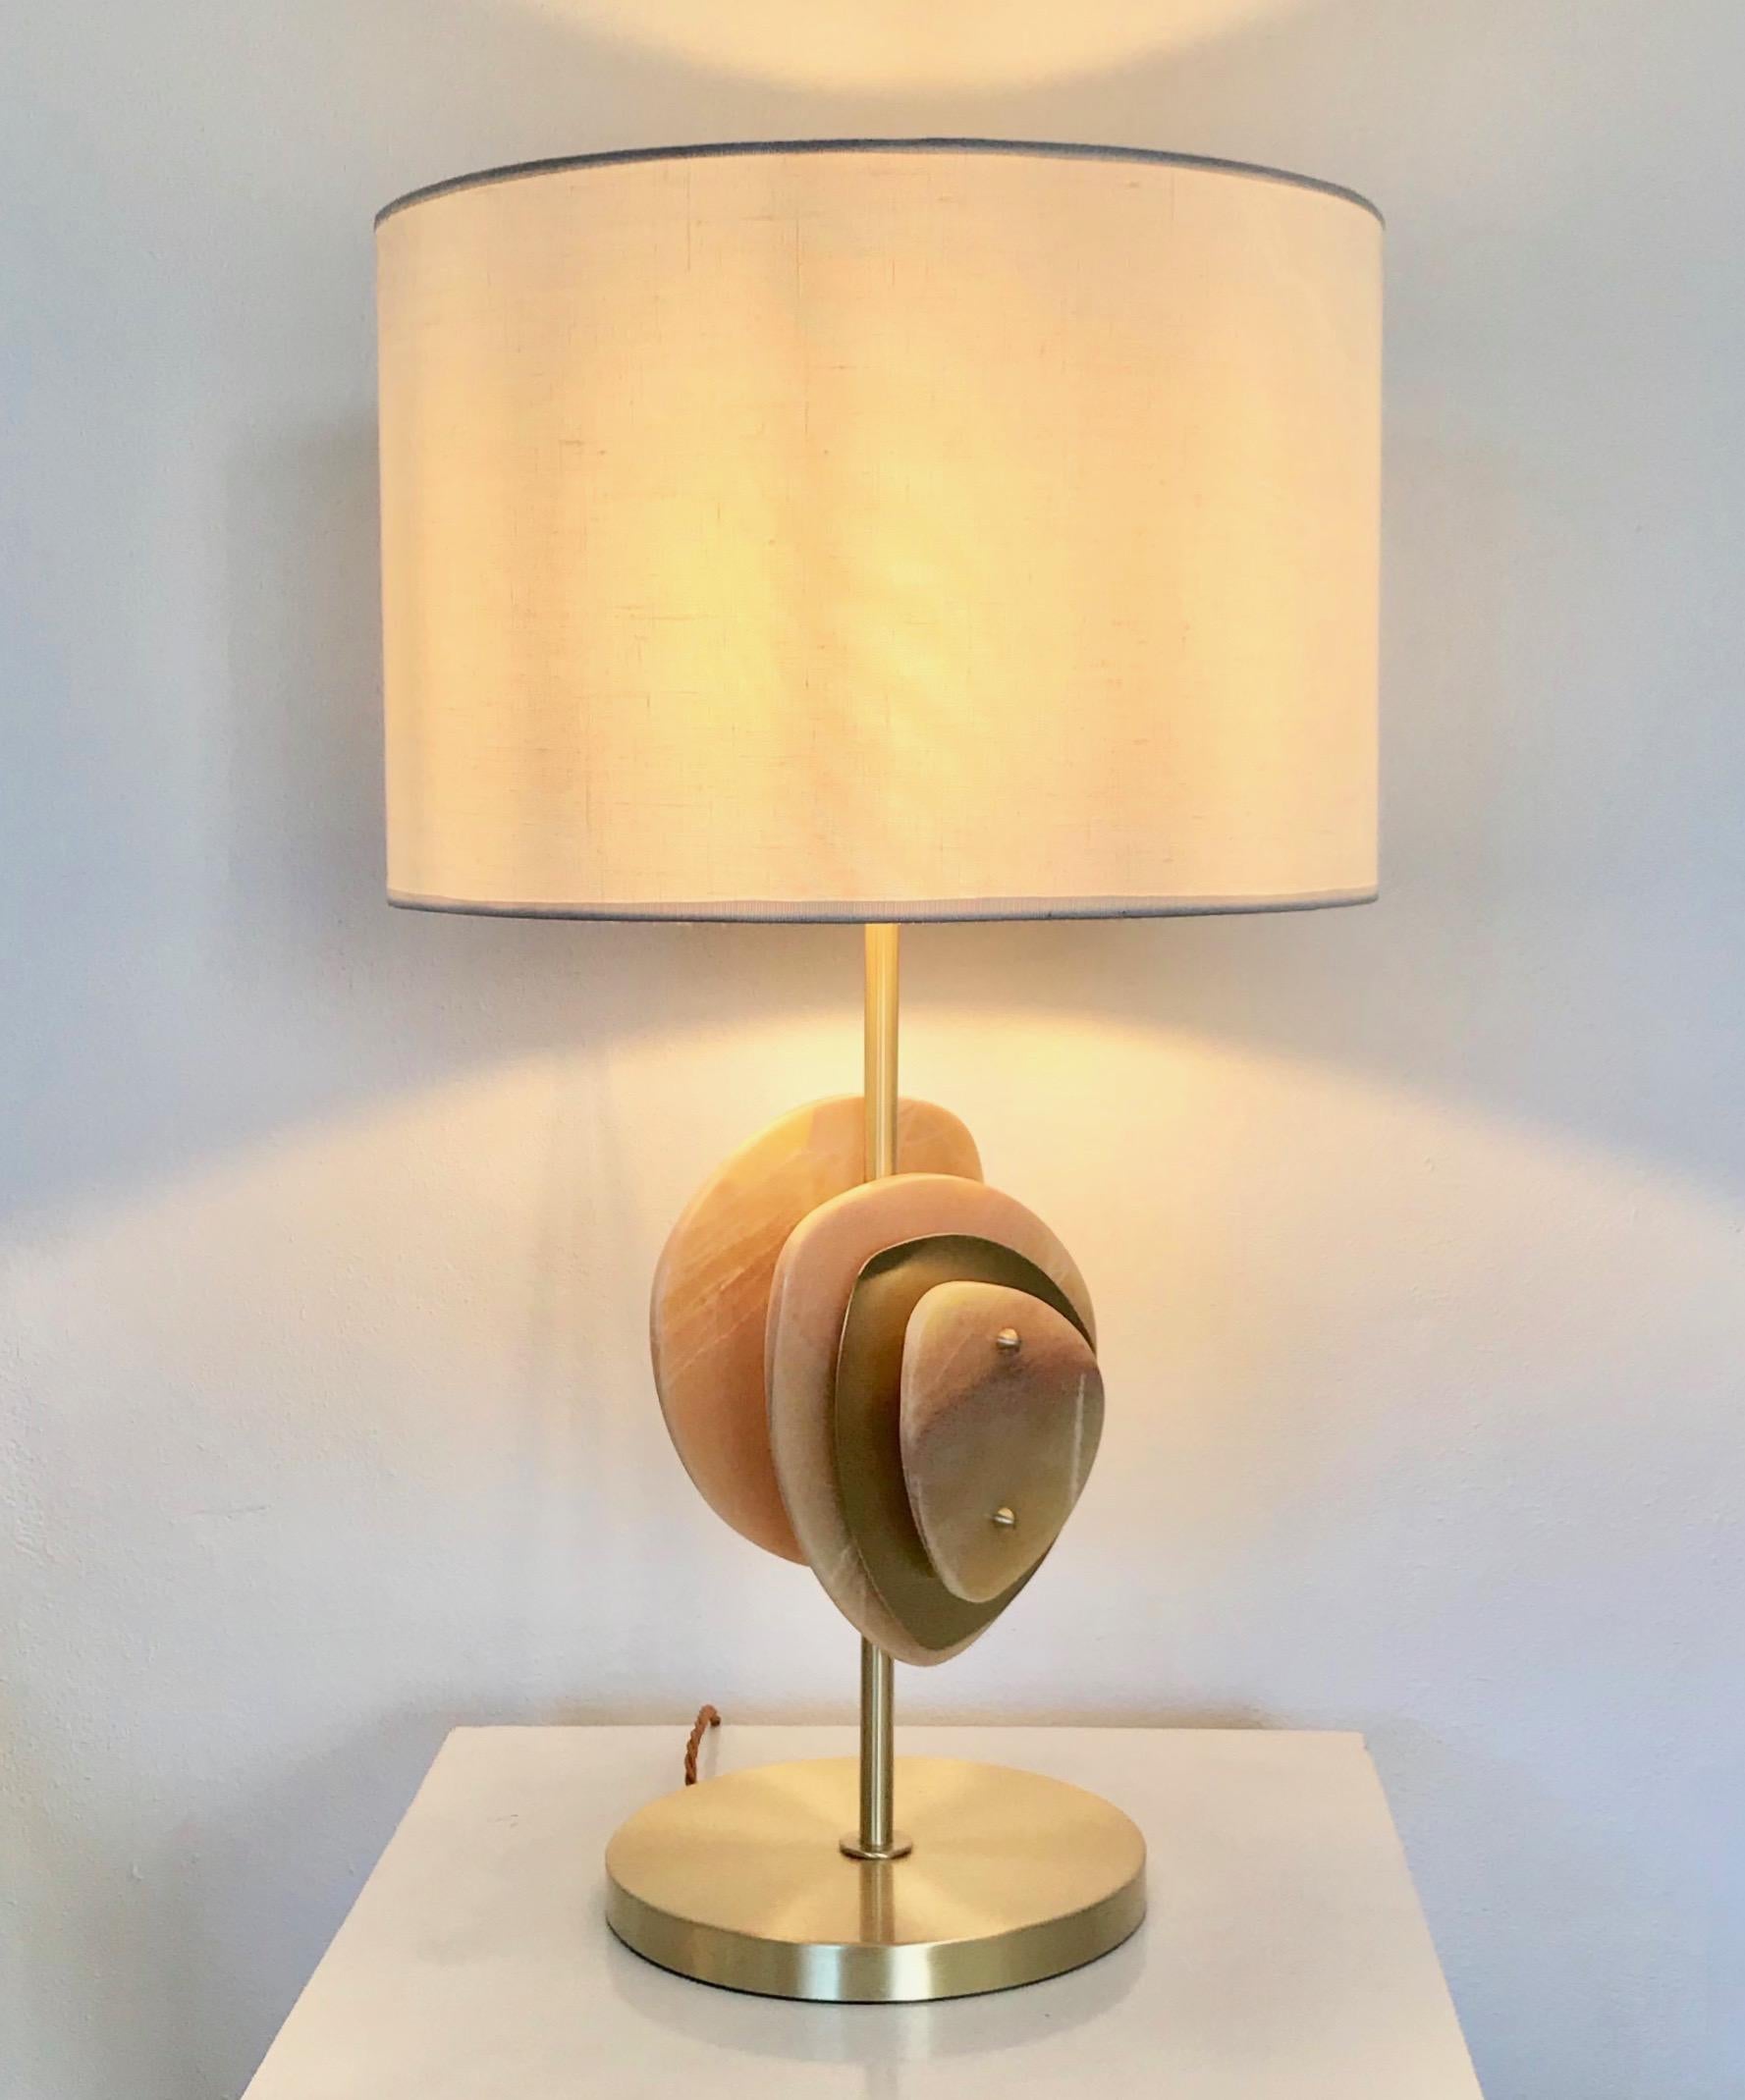 Italian contemporary honey onyx and satin brass table lamp called Satellite, entirely handcrafted in Italy. This organic modern design is inspired by nature, earth and water, with a combination of hand cut flat curved elements in stone and brass